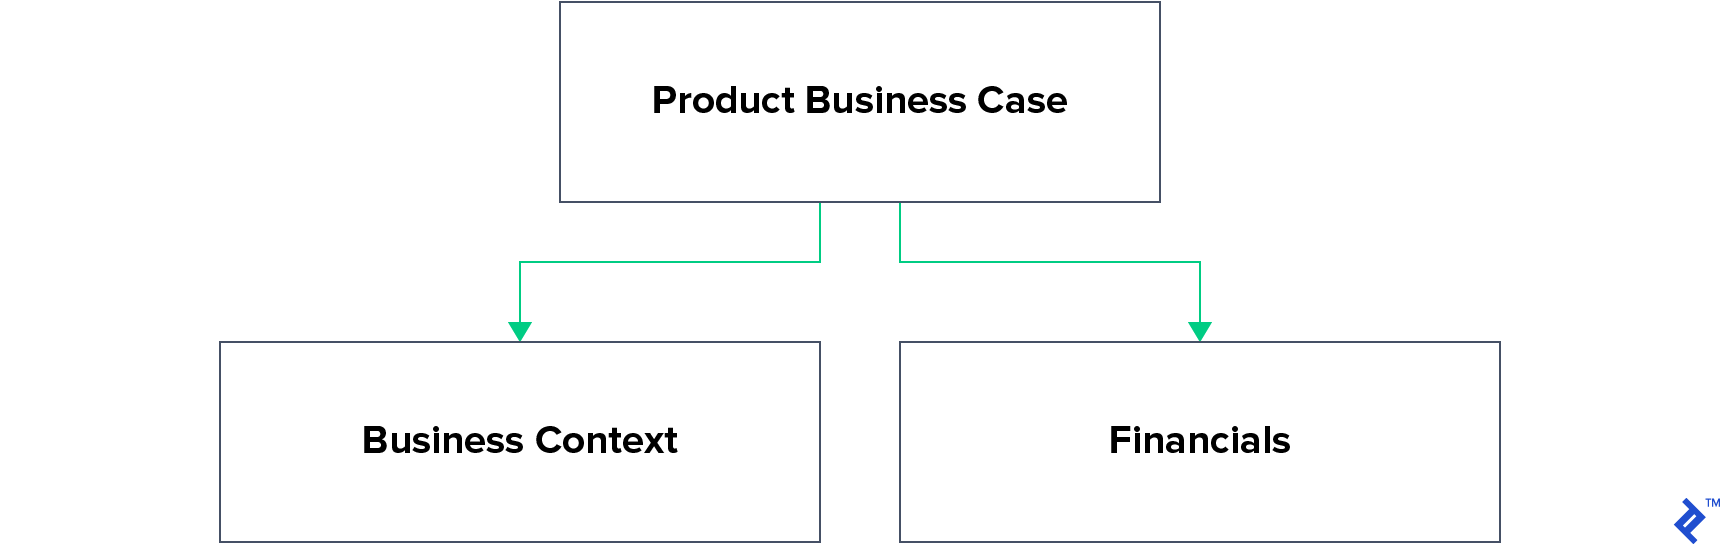 Product business case structure